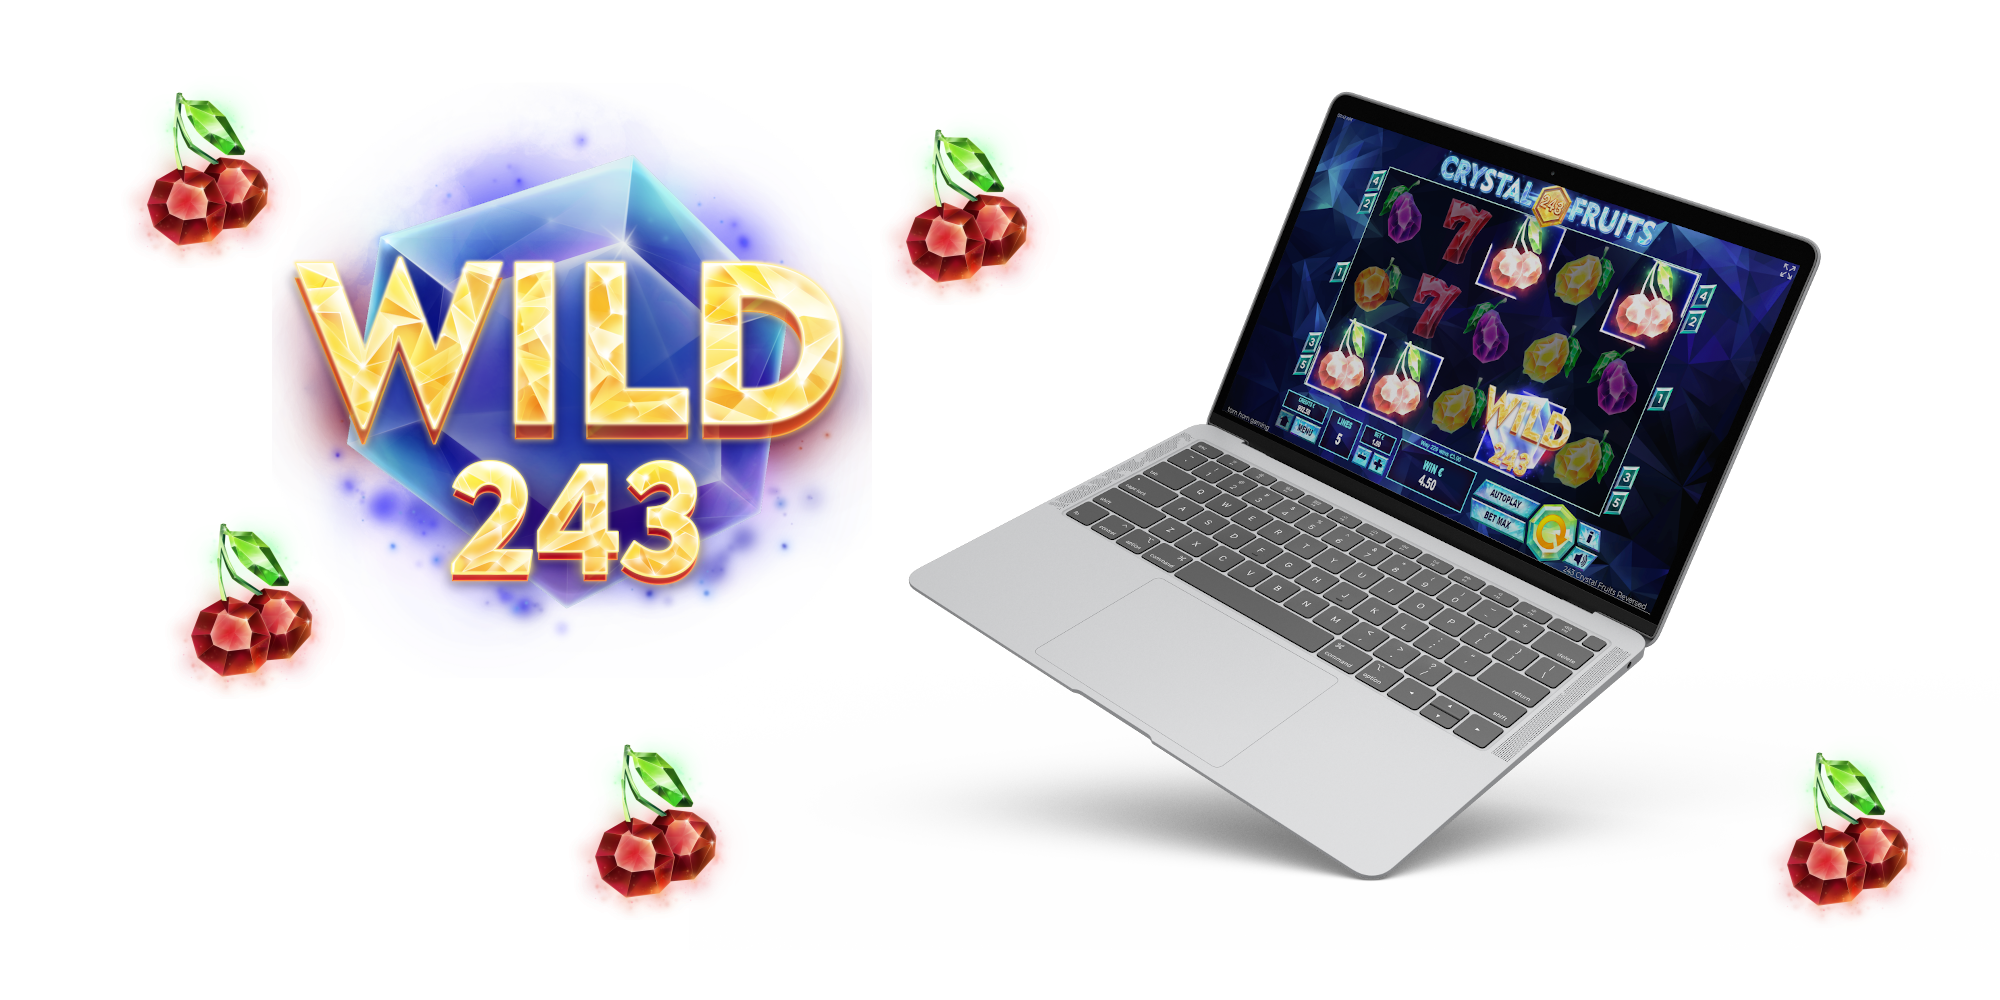 243 Crystal Fruits Reversed online casino slot game has Wild features